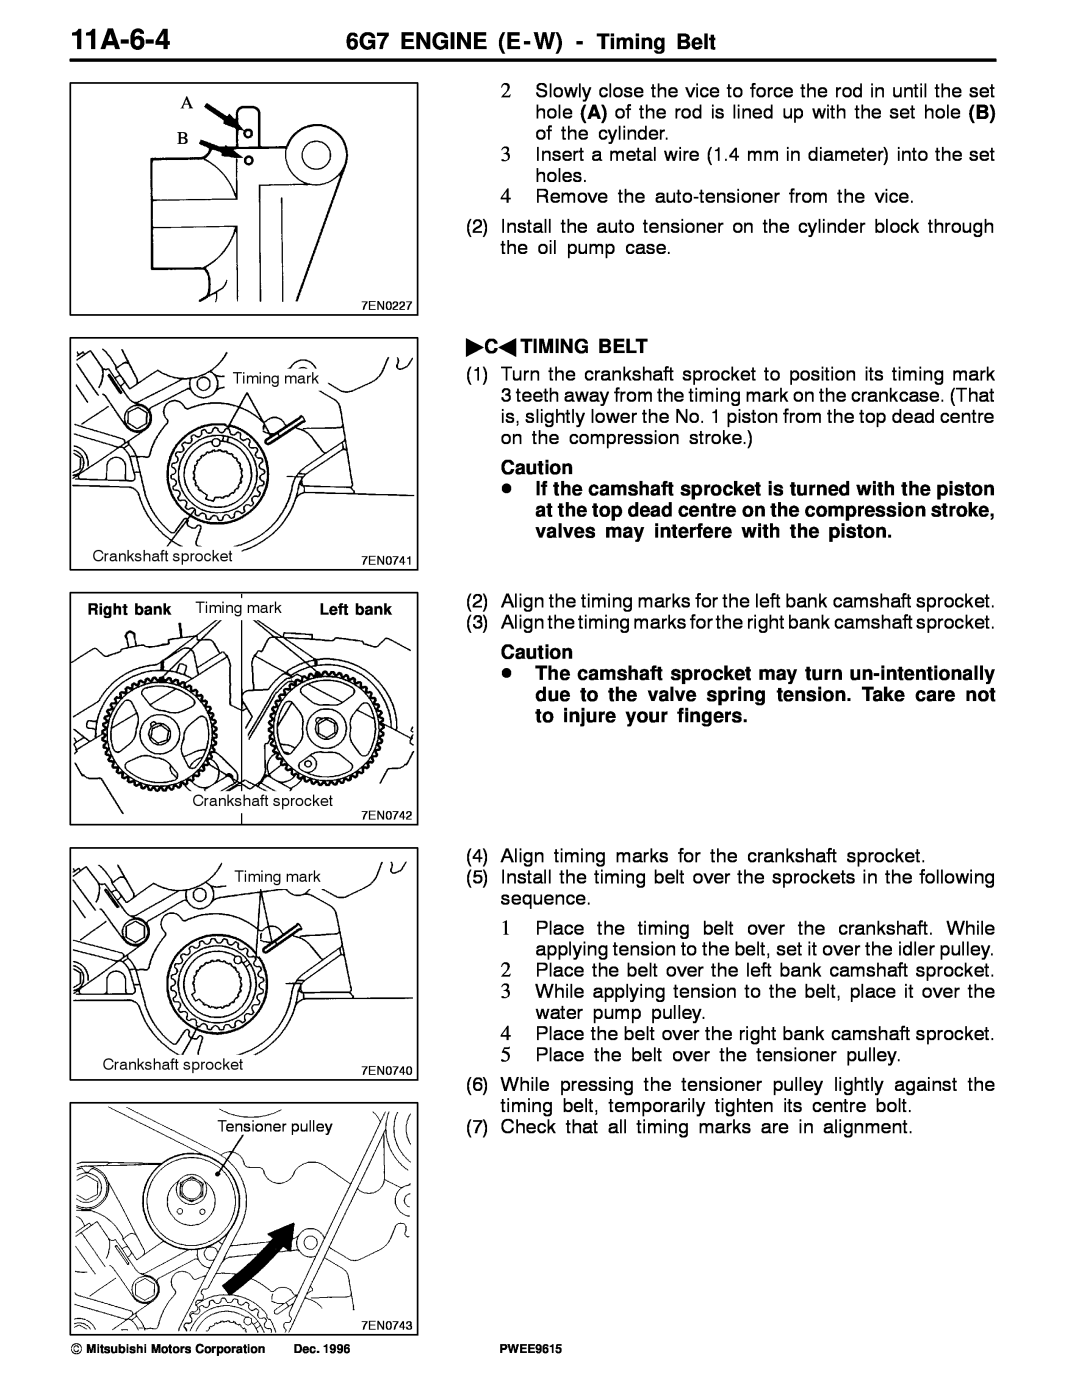 Mitsubishi specifications 11A-6-4, Ca Timing Belt, 6G7 ENGINE E - W - Timing Belt 